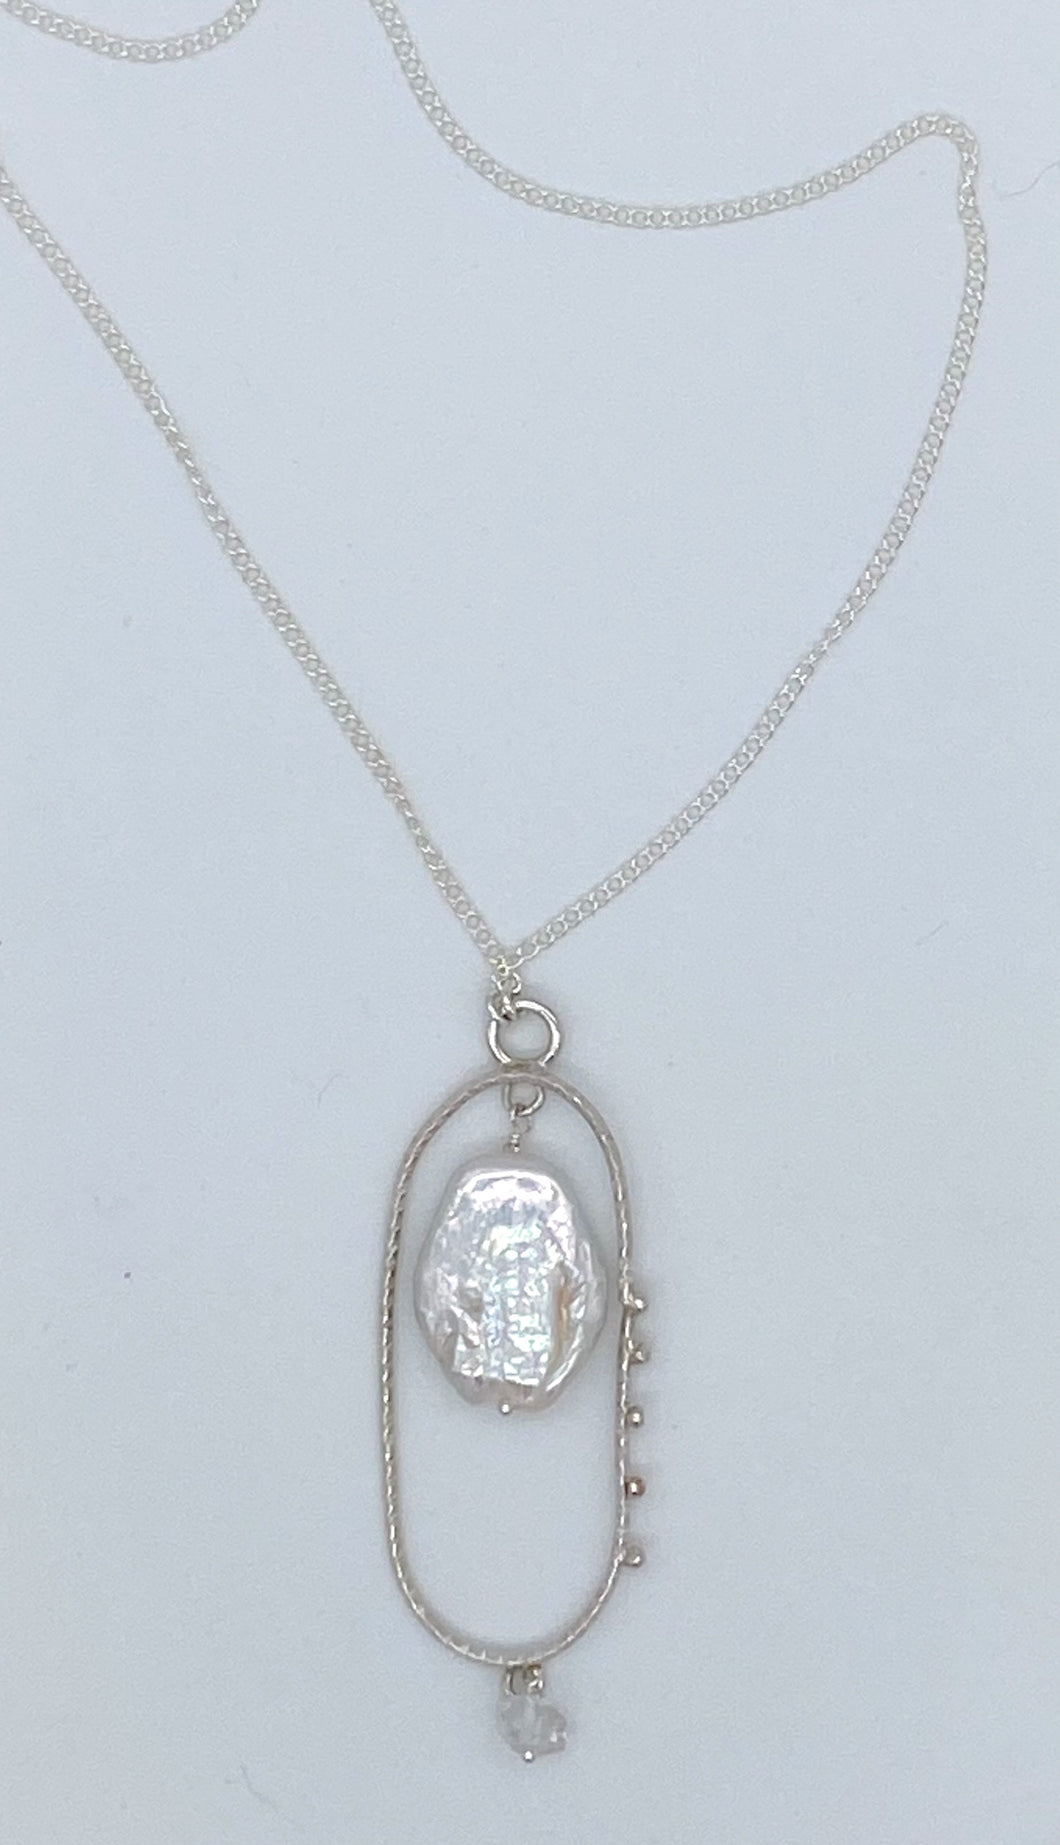 Pearl, herkimer diamond, and silver necklace